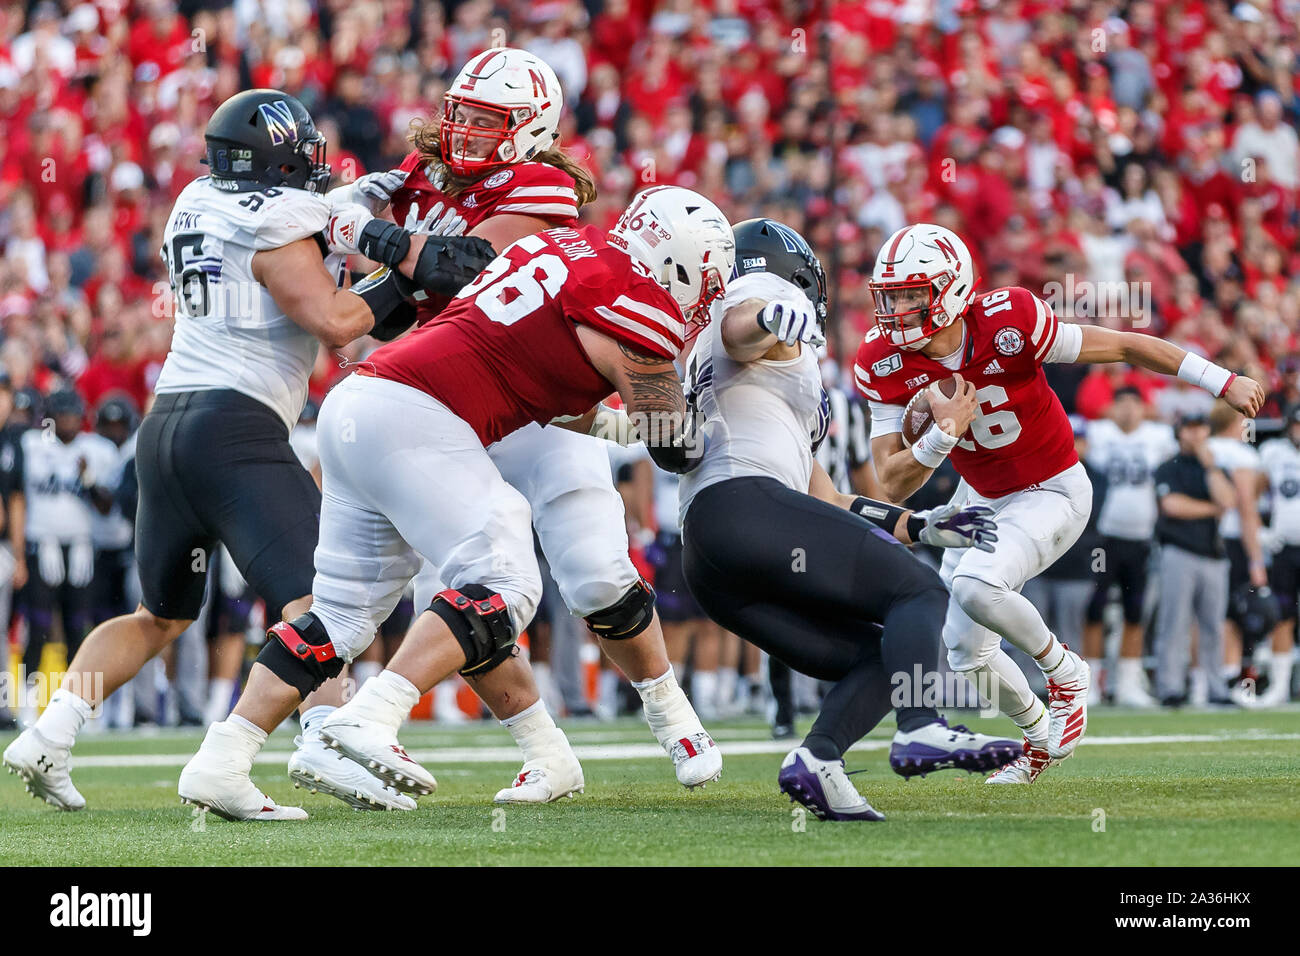 Lincoln, NE. U.S. 05th Oct, 2019. Nebraska Cornhuskers quarterback Noah Vedral #16 rushes late in the 4th quarter to set up the winning field goal in action during a NCAA Division 1 football game between Northwestern Wildcats and the Nebraska Cornhuskers at Memorial Stadium in Lincoln, NE. Attendance: 89,384.Nebraska won 13-10.Michael Spomer/Cal Sport Media/Alamy Live News Stock Photo